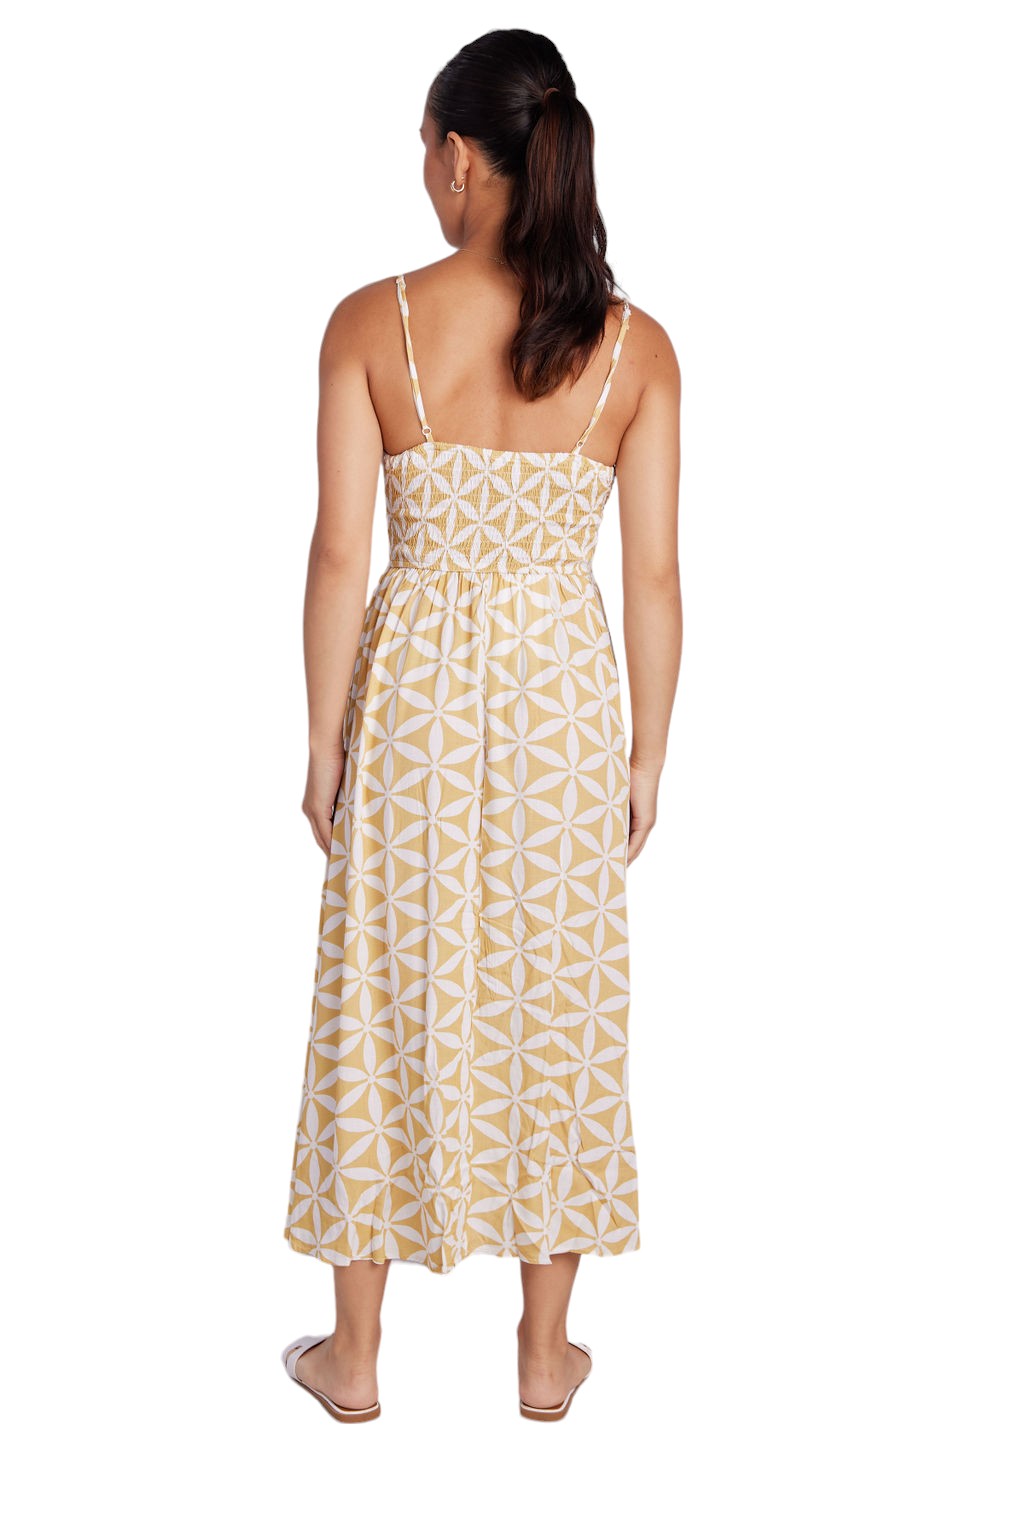 Pacific Flowers Maxi Dress